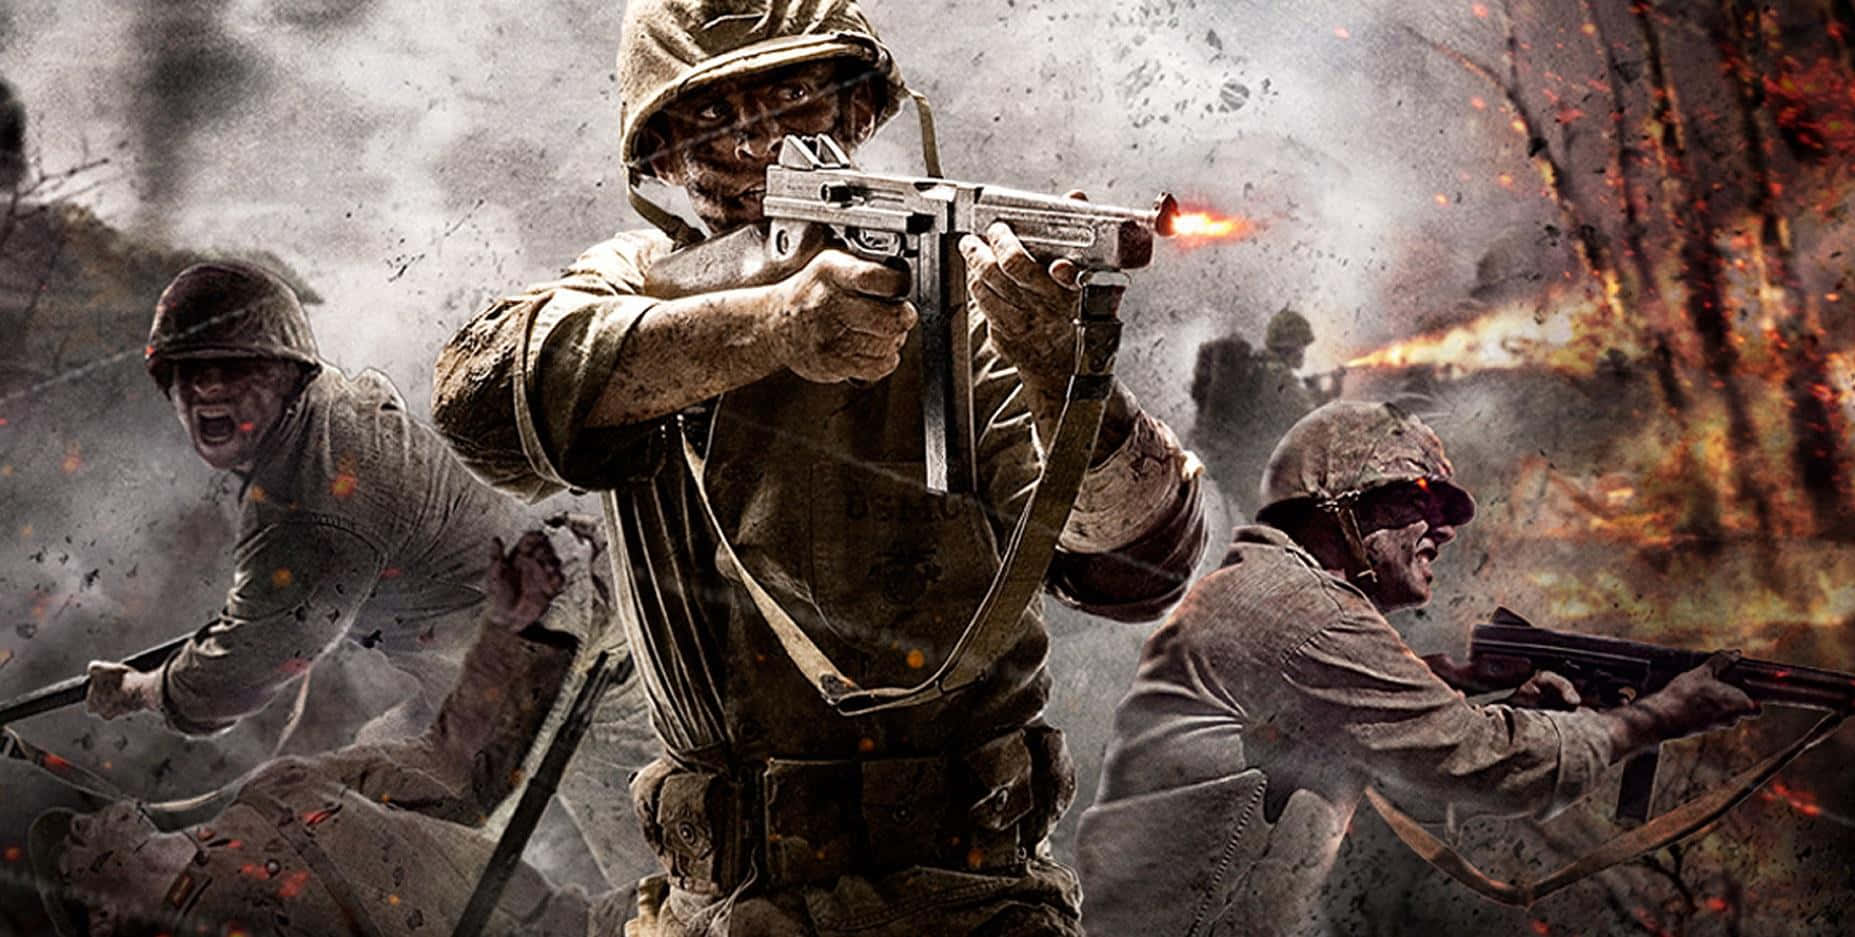 Intense Combat Battle in Call of Duty Soldiers Wallpaper